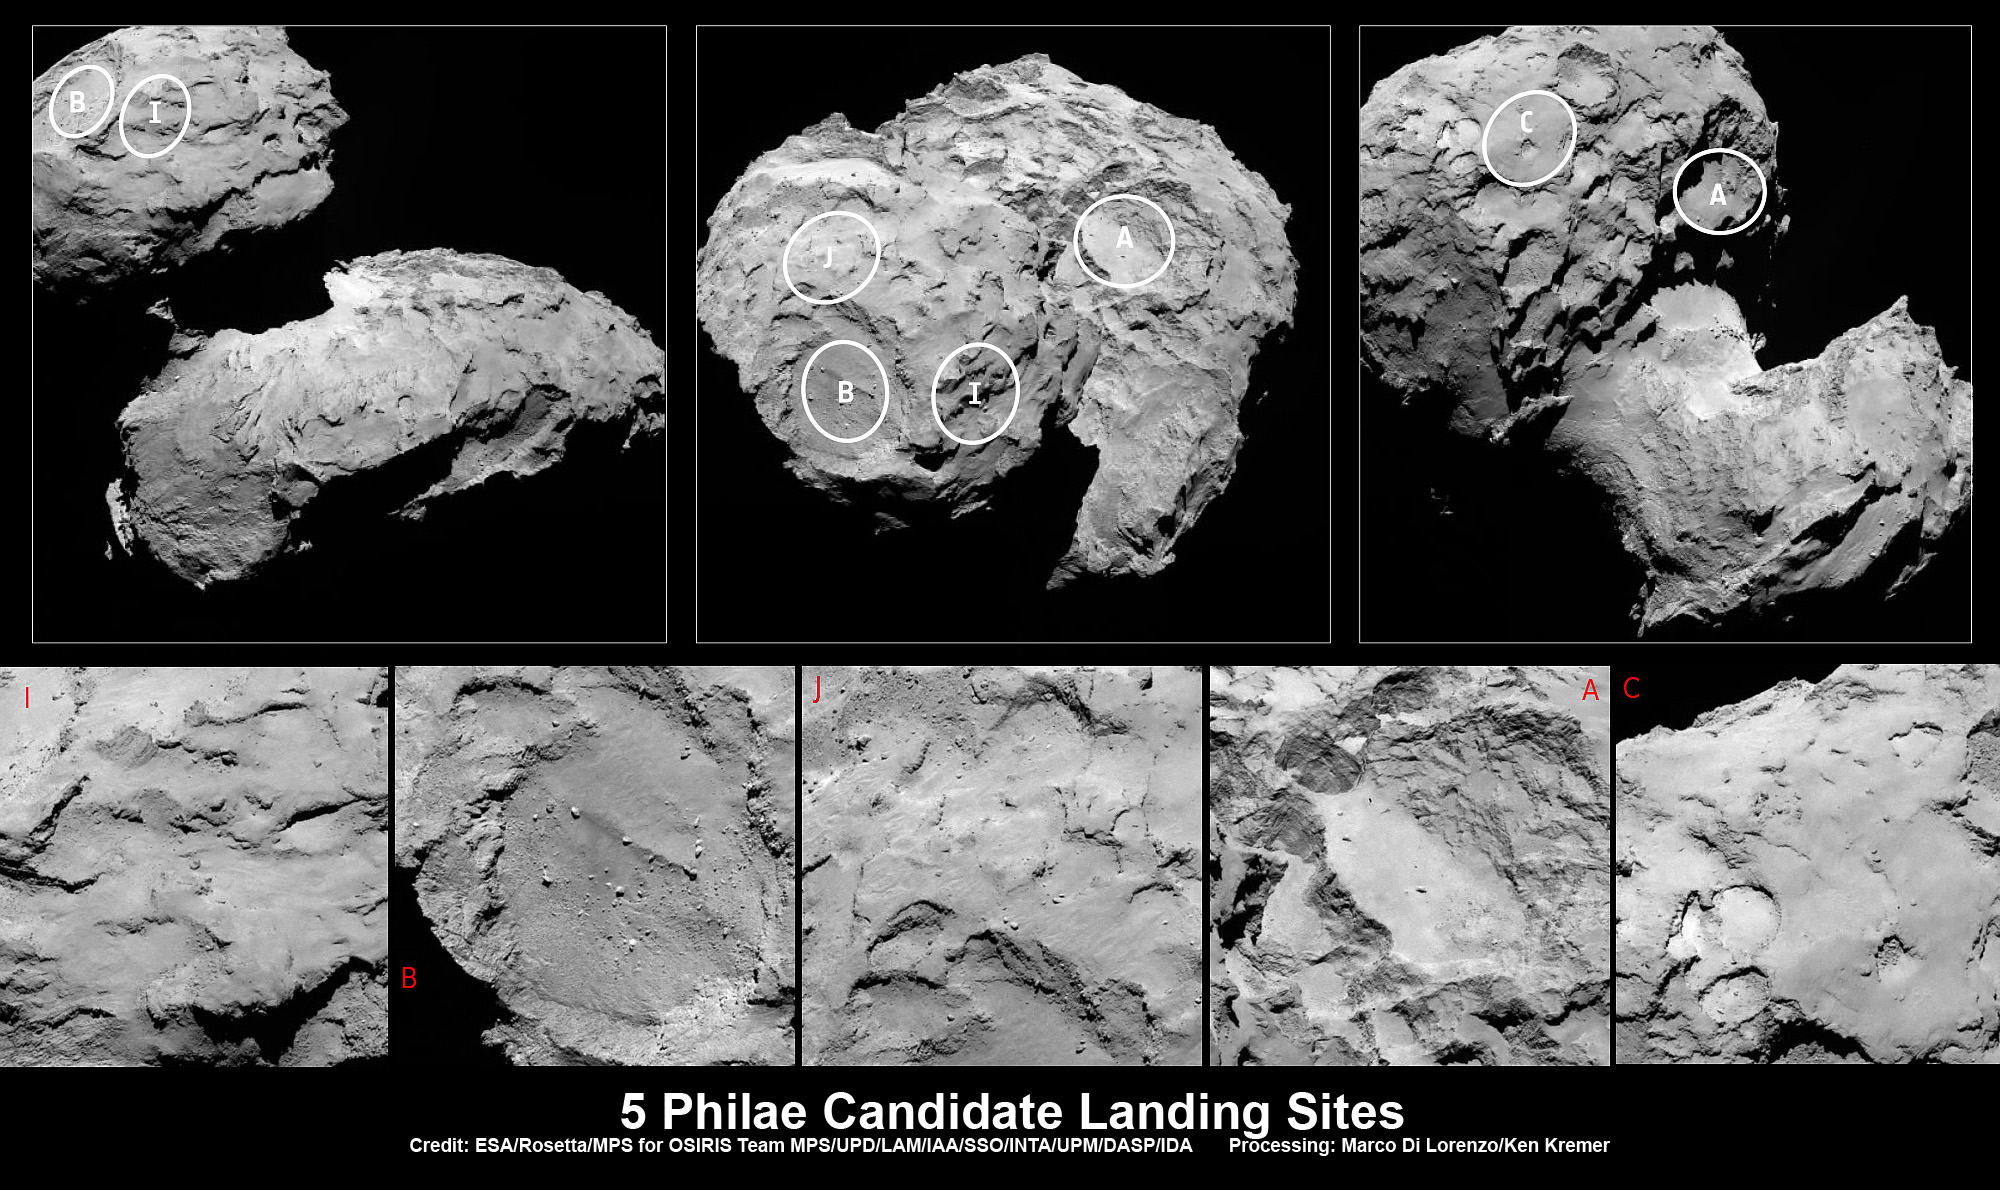 Five candidate sites were initially  identified on Comet 67P/Churyumov-Gerasimenko for Rosetta’s Philae lander. Sites J and C were later chosen as the primary and backup landing sitea. The approximate locations of the five regions are marked on these OSIRIS narrow-angle camera images taken on 16 August 2014 from a distance of about 100 km. Enlarged insets below highlight original Top 5 landing zones. Credits: ESA/Rosetta/MPS for OSIRIS Team MPS/UPD/LAM/IAA/SSO/INTA/UPM/DASP/IDA Processing: Marco Di Lorenzo/Ken Kremer